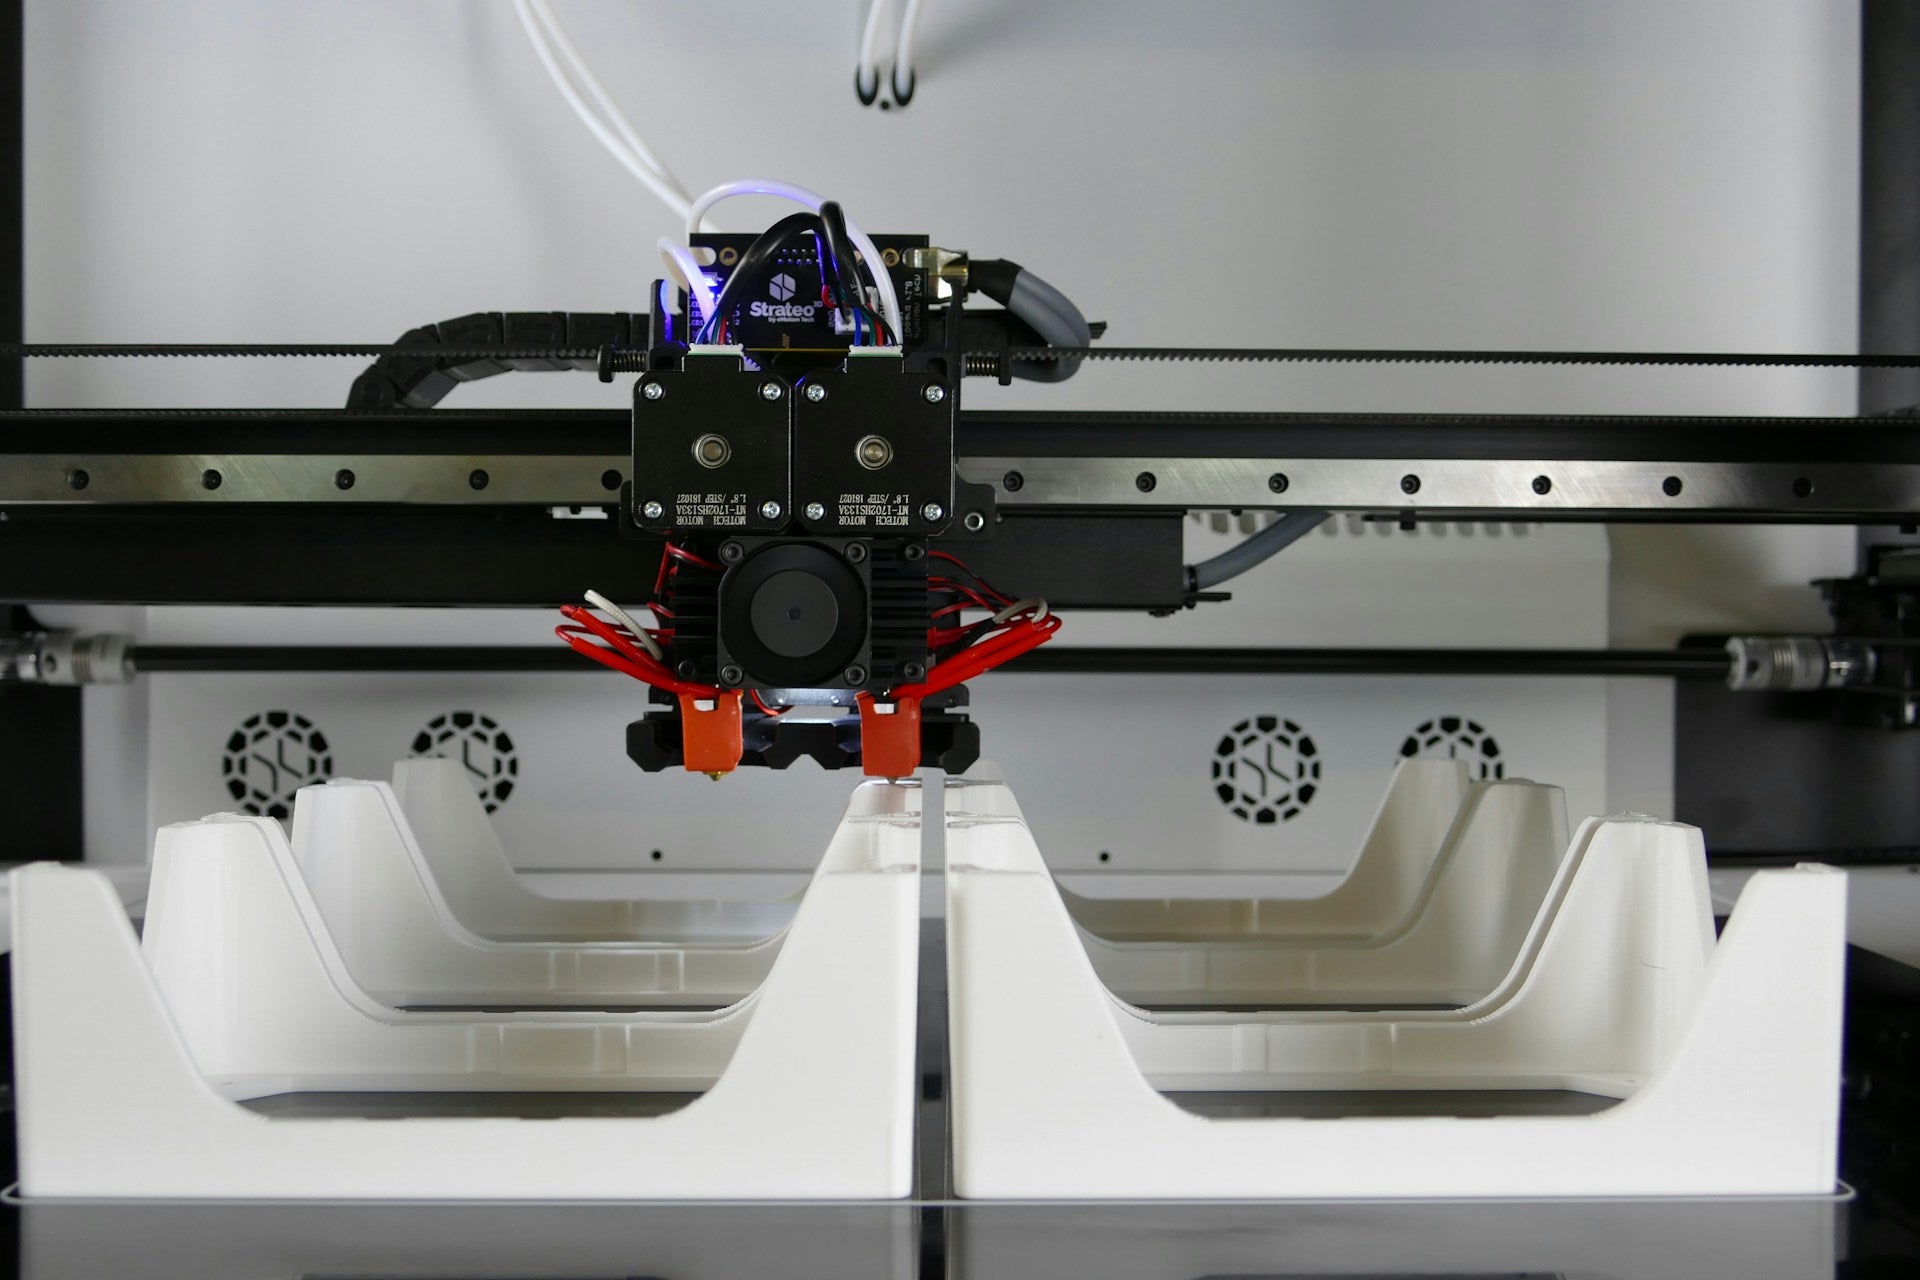 Fields of application of 3D printers